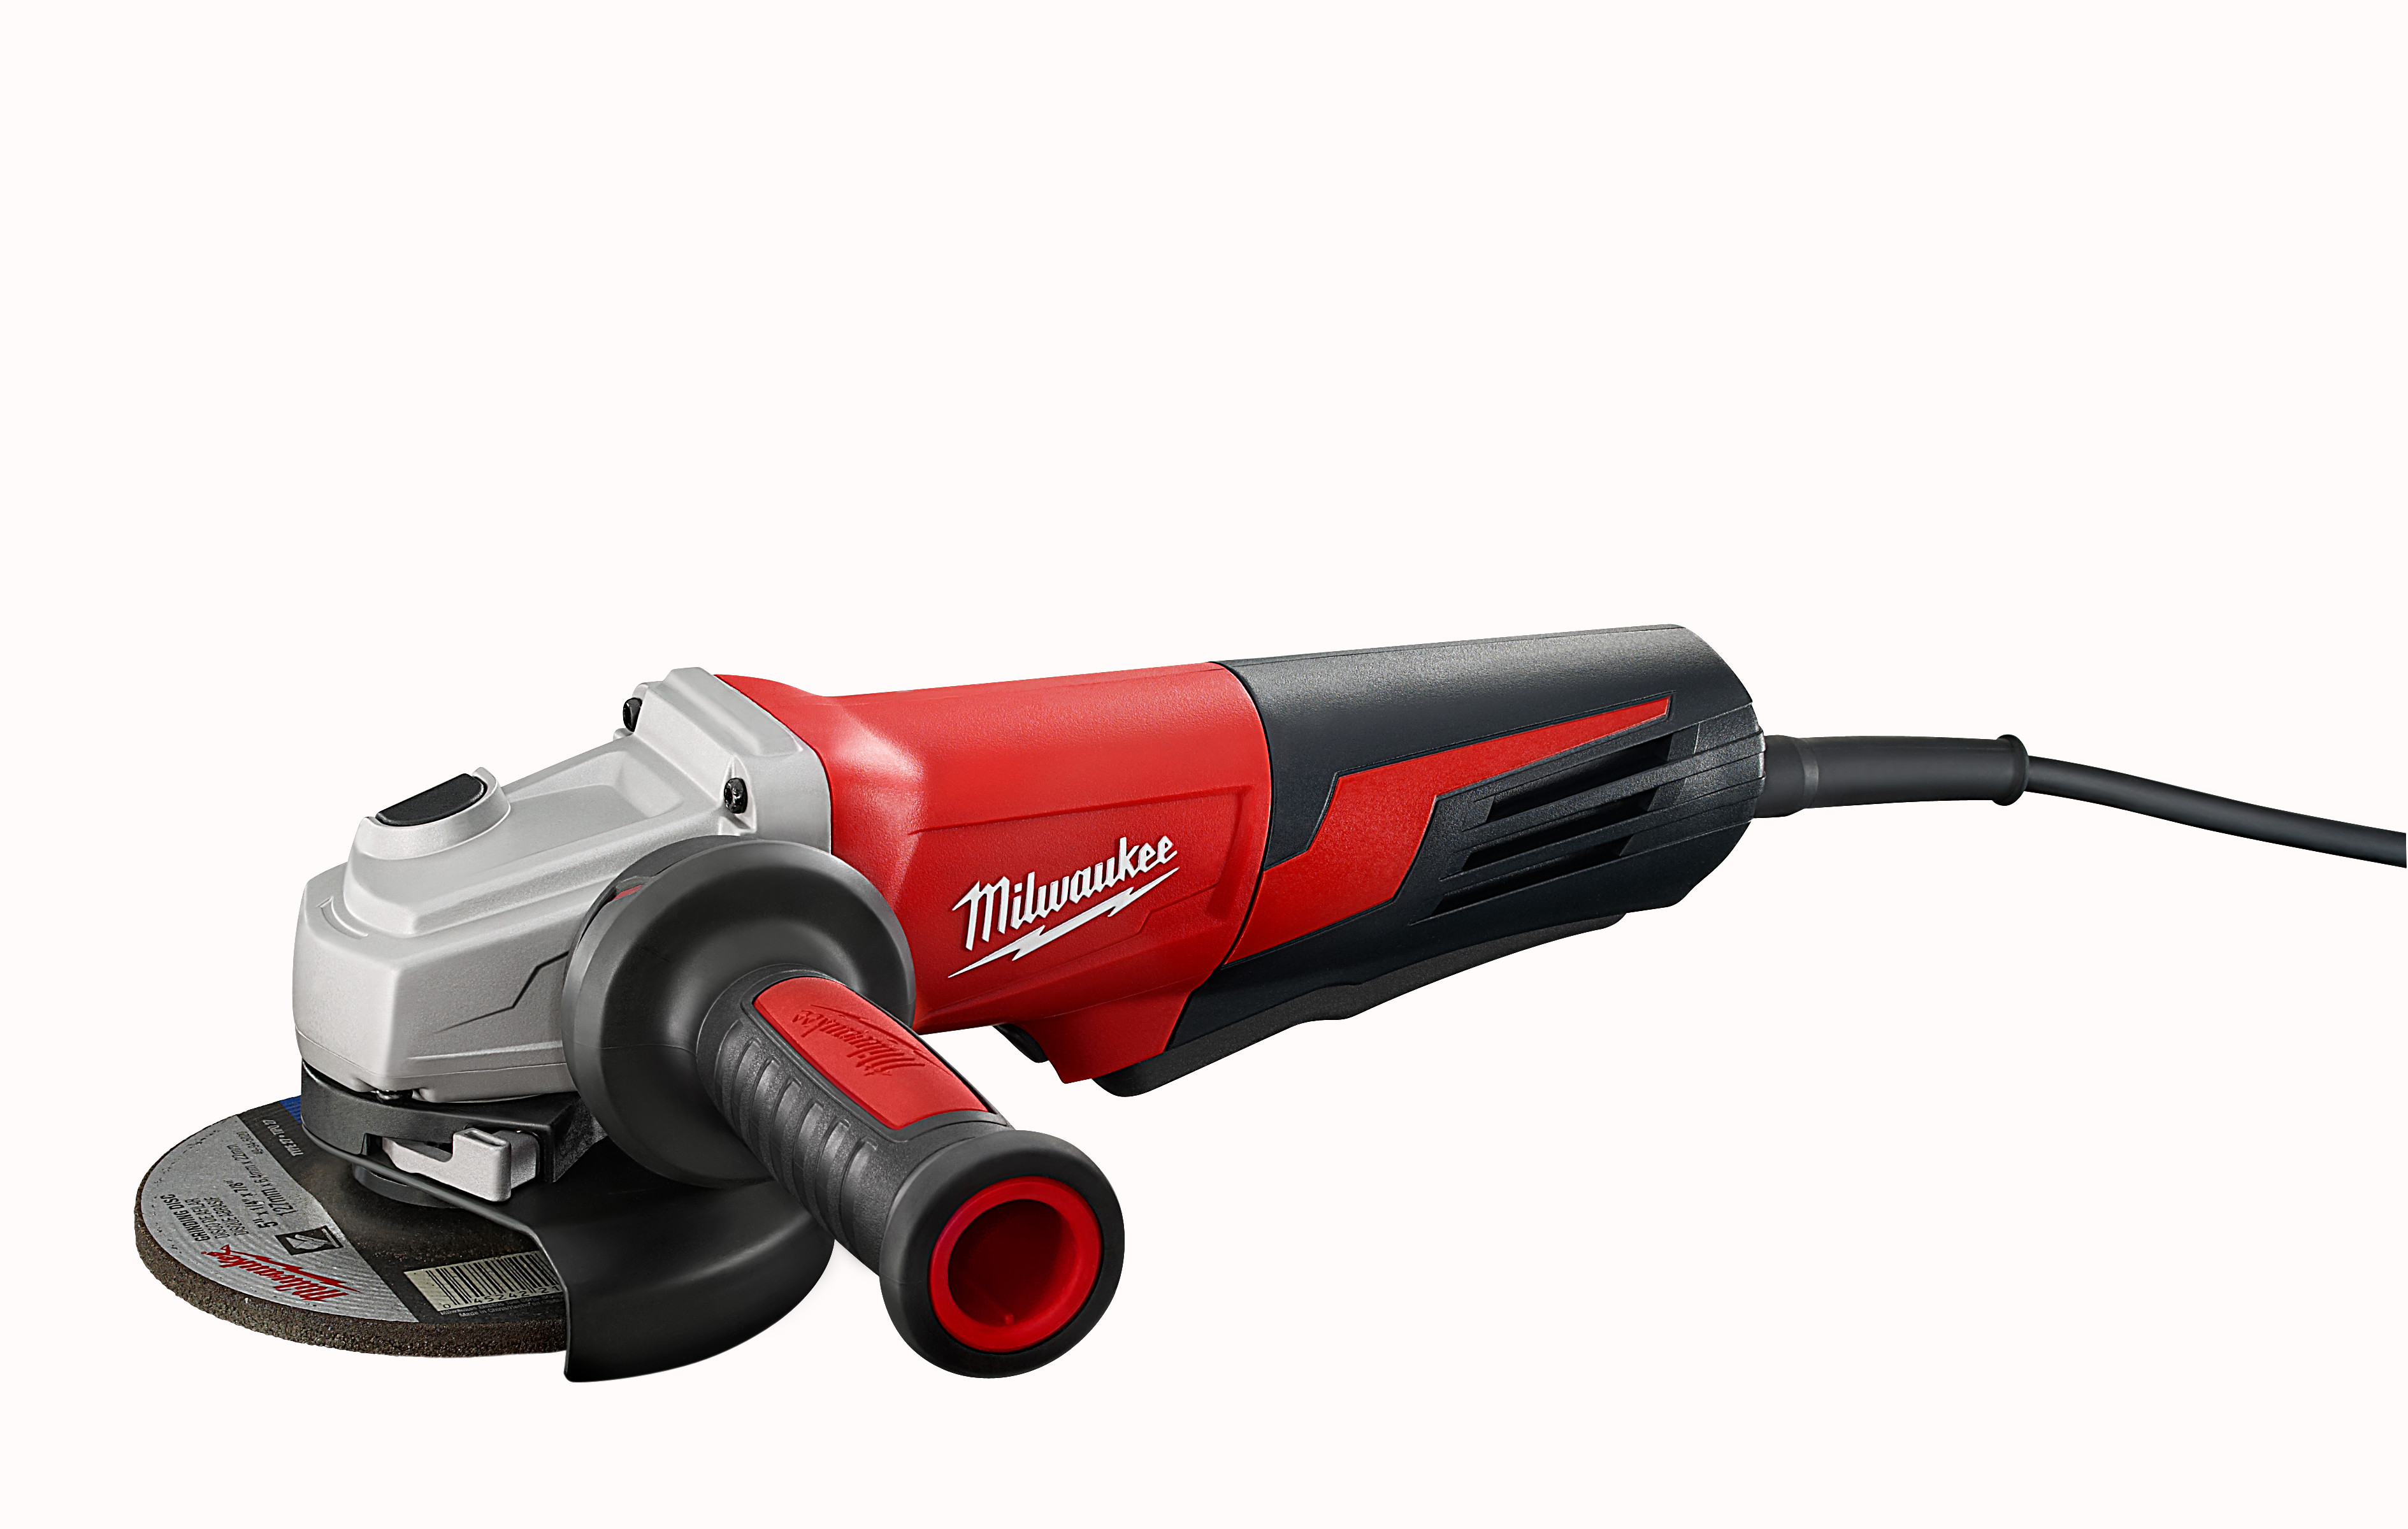 Milwaukee® 6117-30 Double Insulated Small Angle Grinder, 5 in Dia Wheel, 5/8-11 Arbor/Shank, 120 VAC, Black/Red